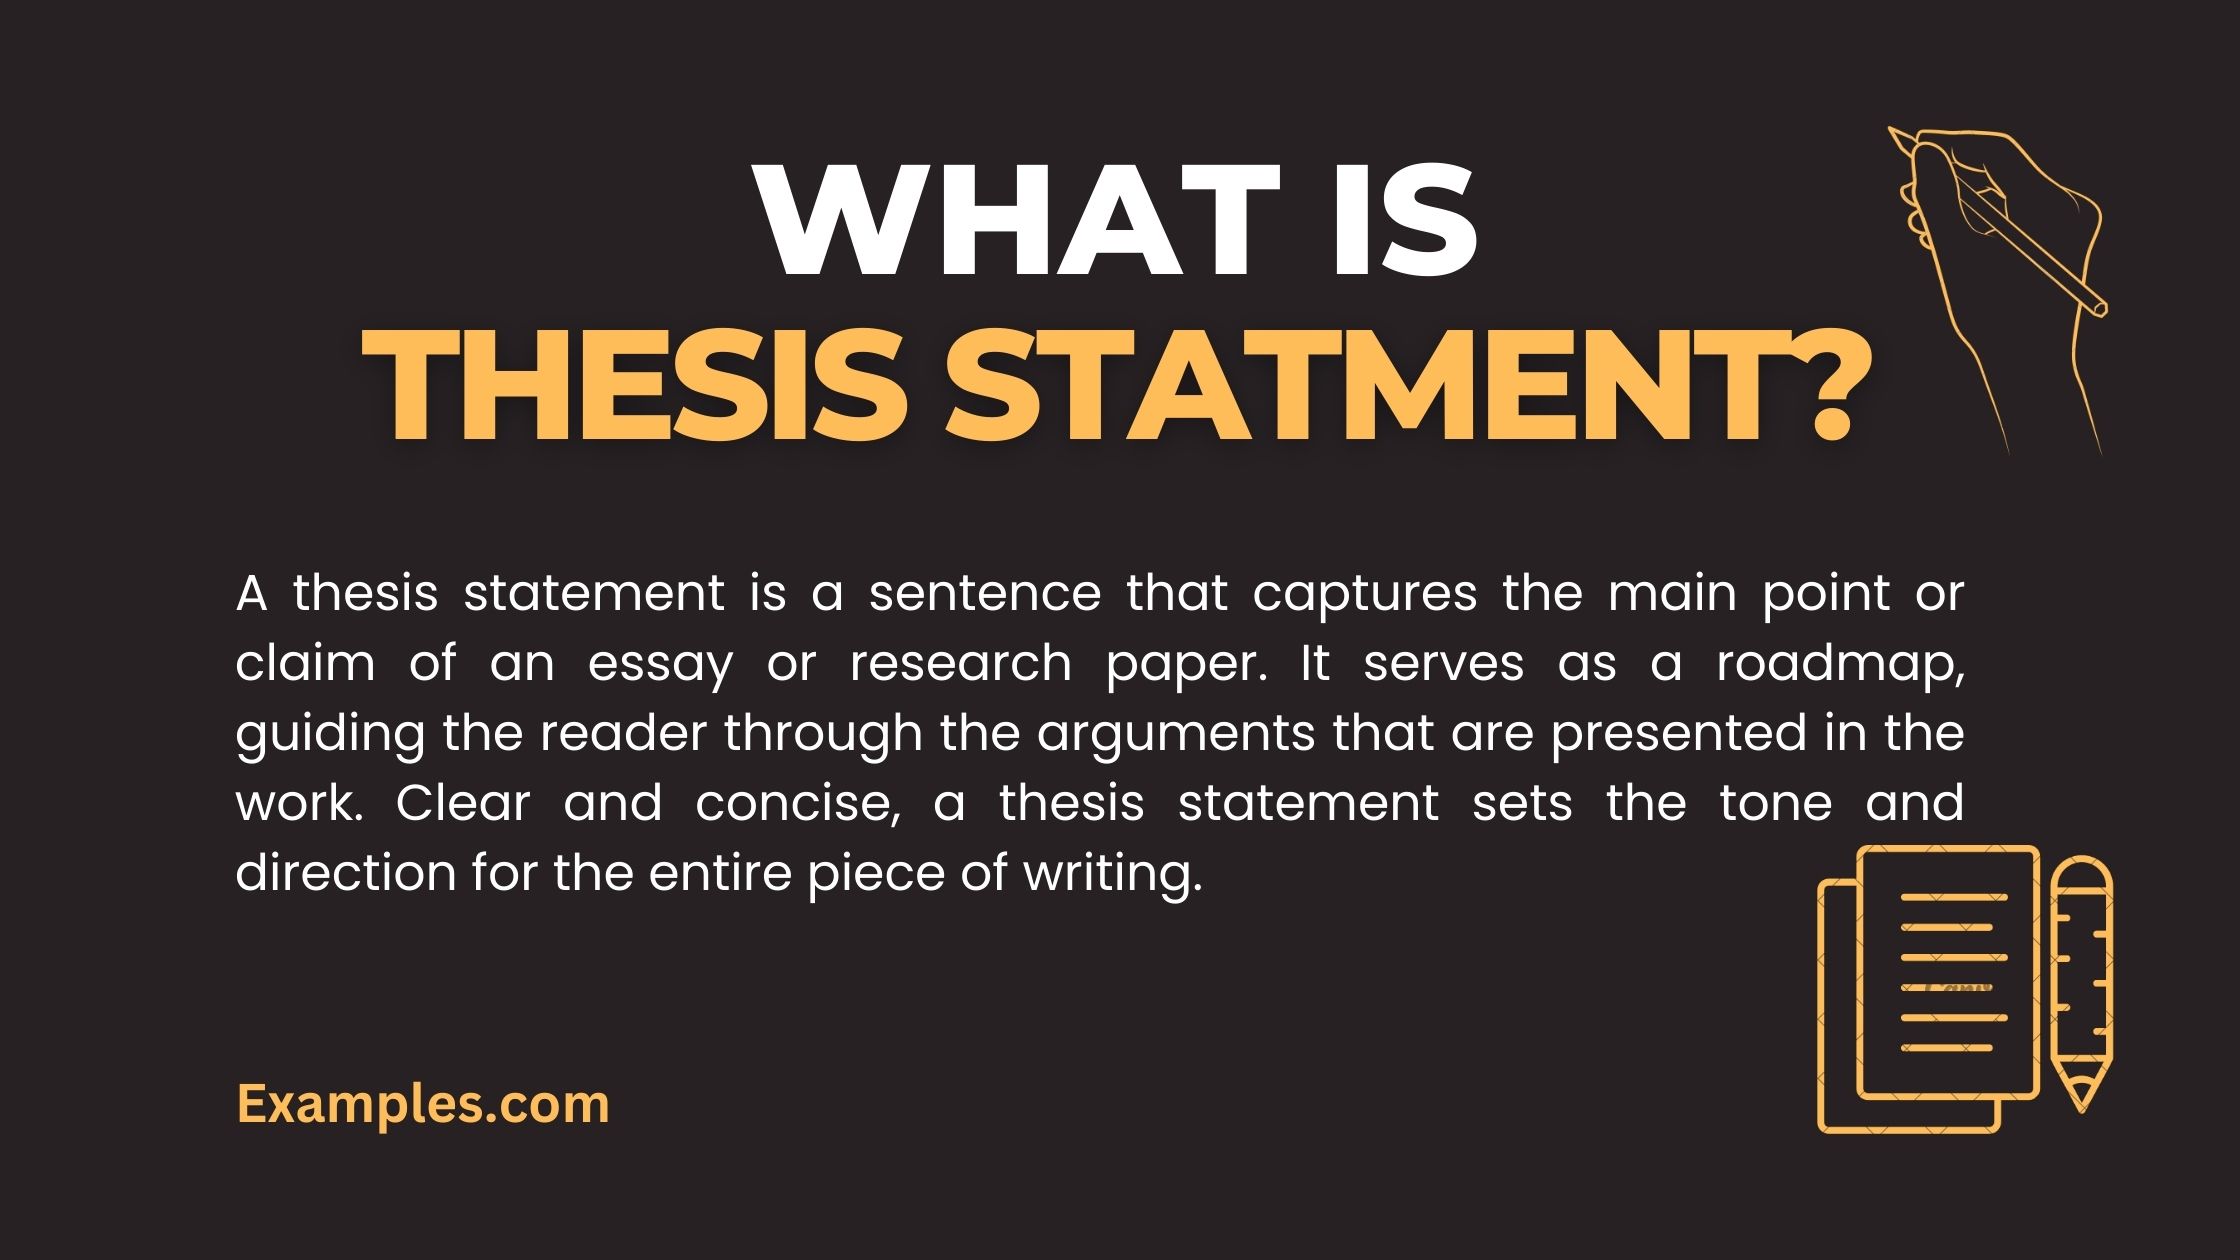 thesis statement is concise